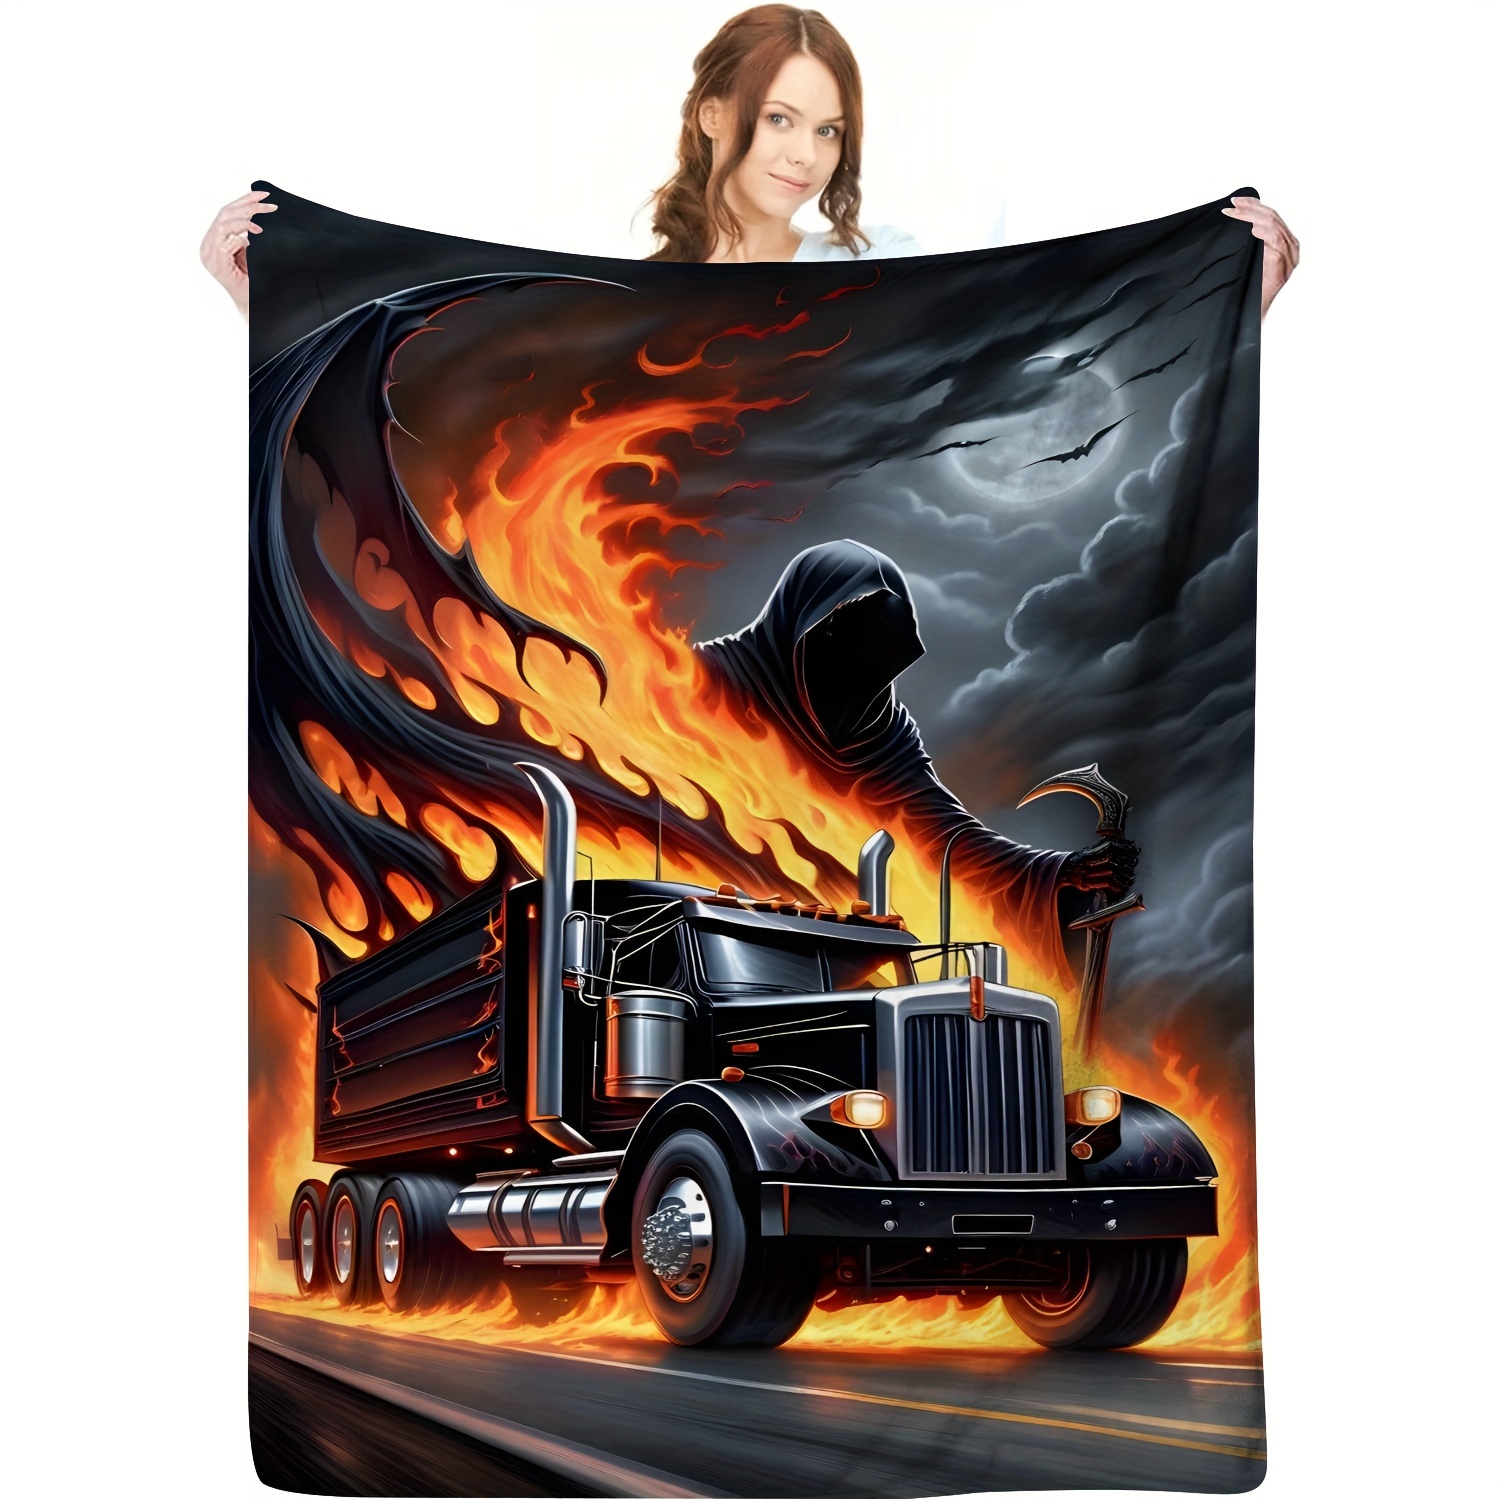 

Style Knitted Throw Blanket - Horror Themed Polyester Flannel Fleece Blanket With Truck And Flames Pattern - All Seasons Cozy Bedding With Unique Embellishment Features